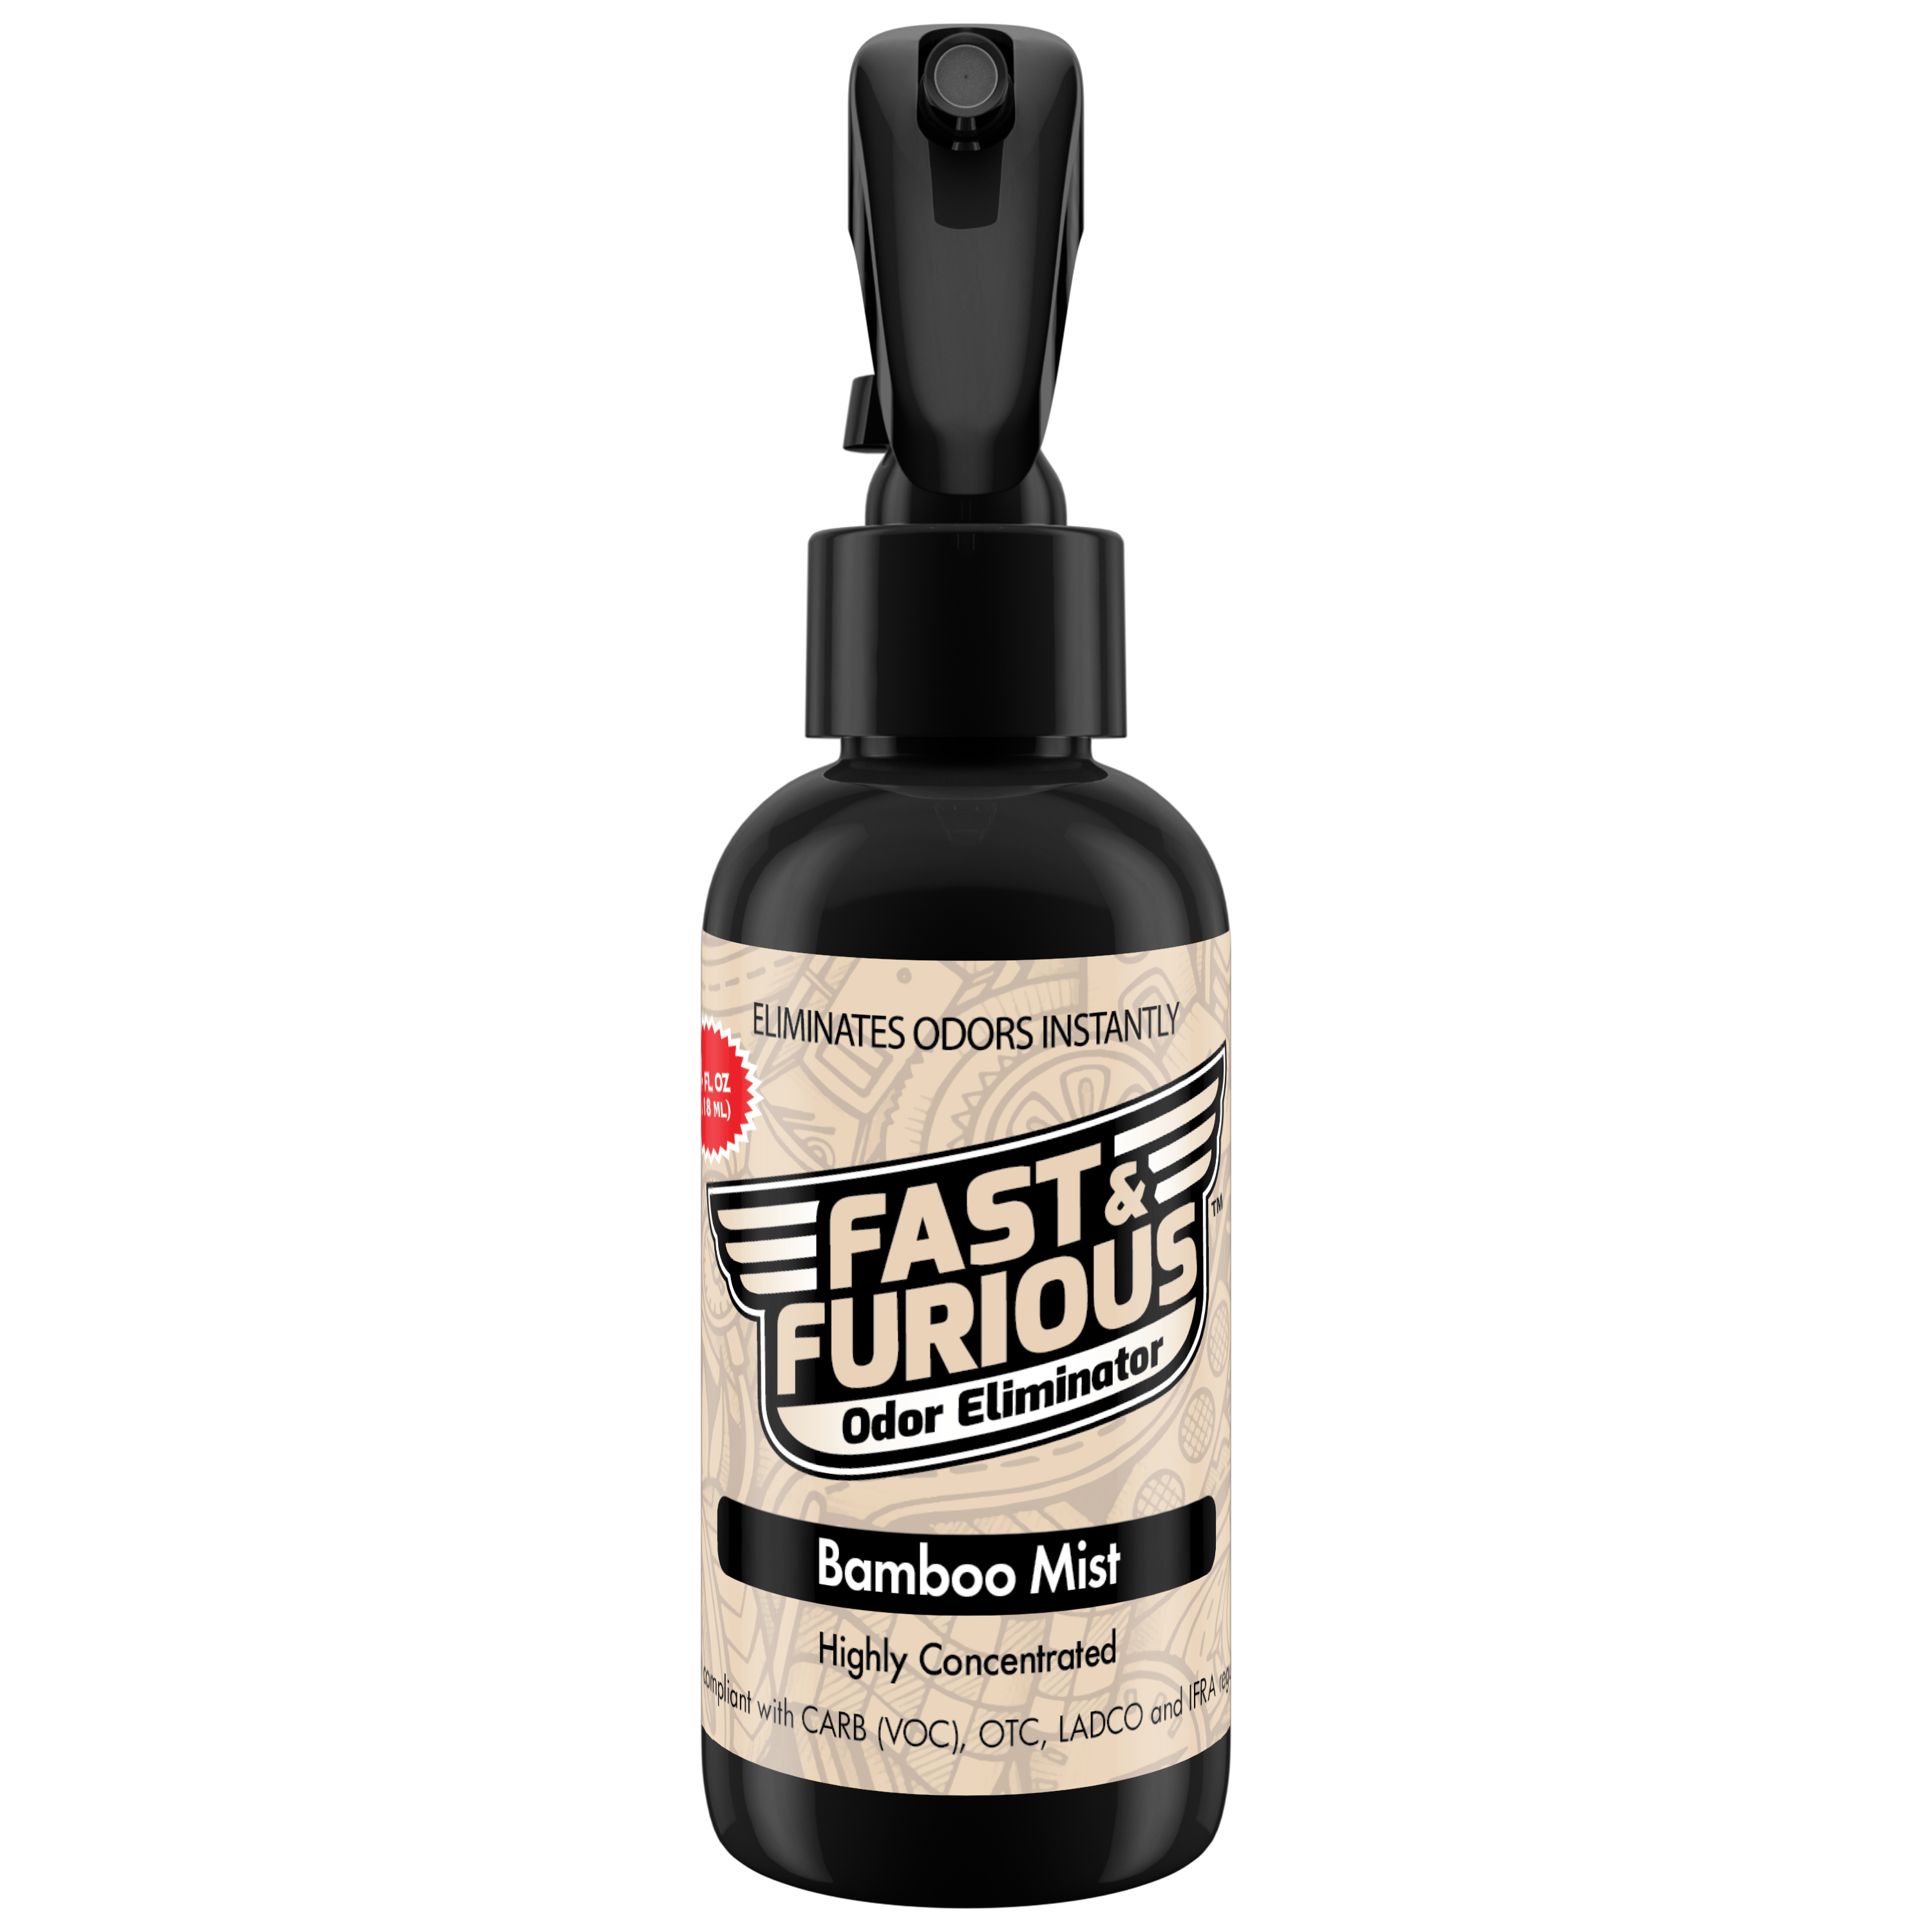 Fast and Furious Odor Eliminator - Bamboo Mist Scent